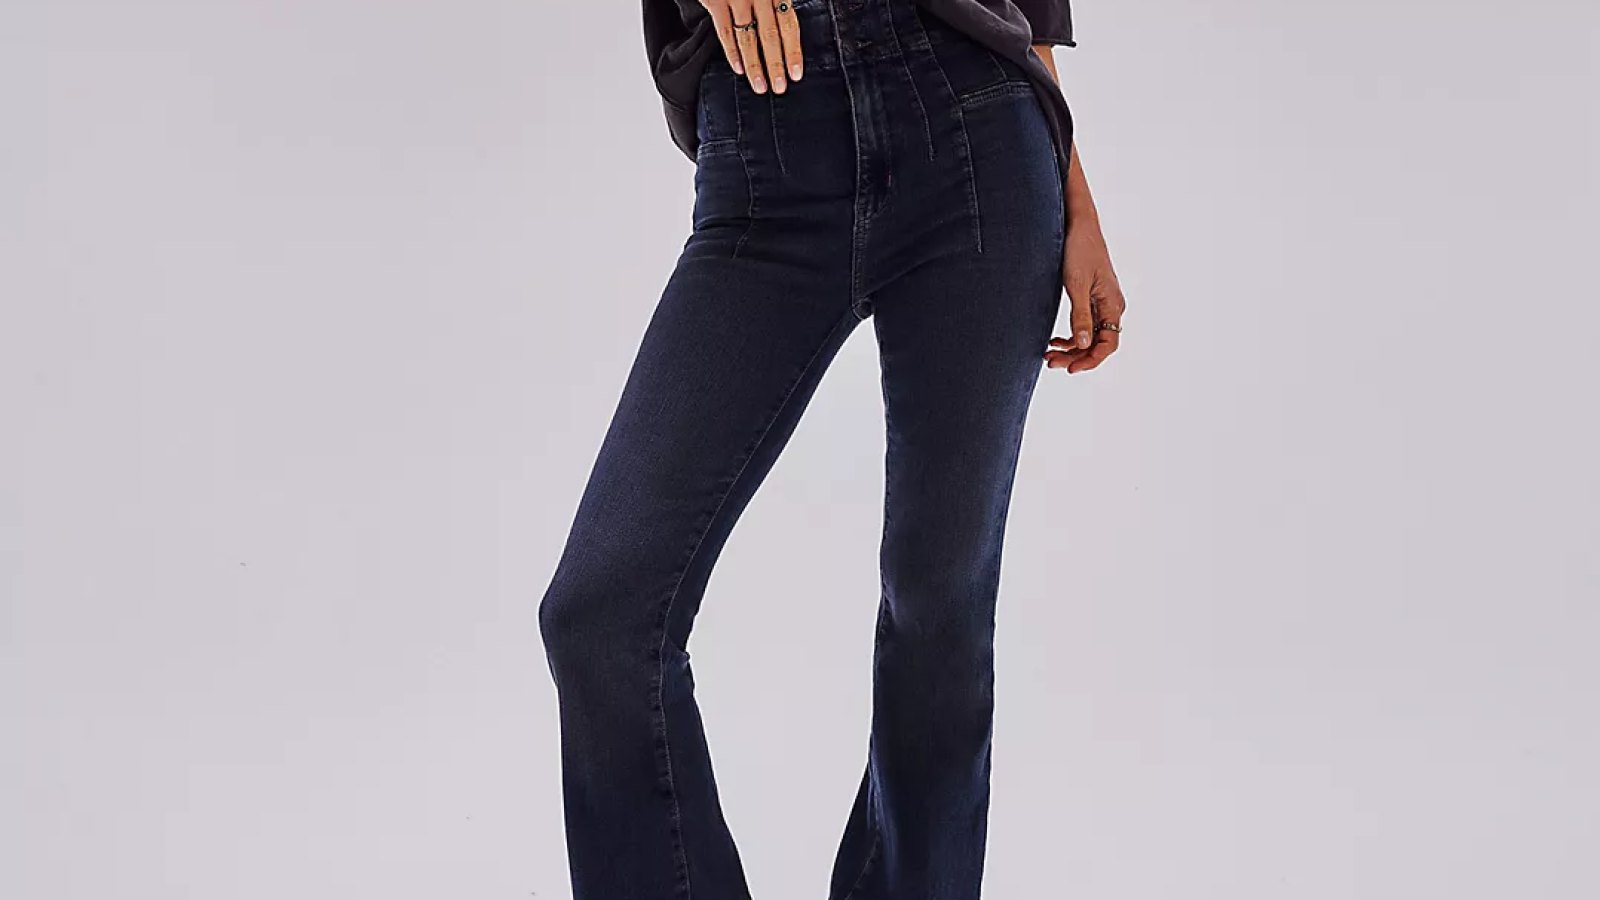 These Free People Pants Are the Most Flattering Jeans I Own